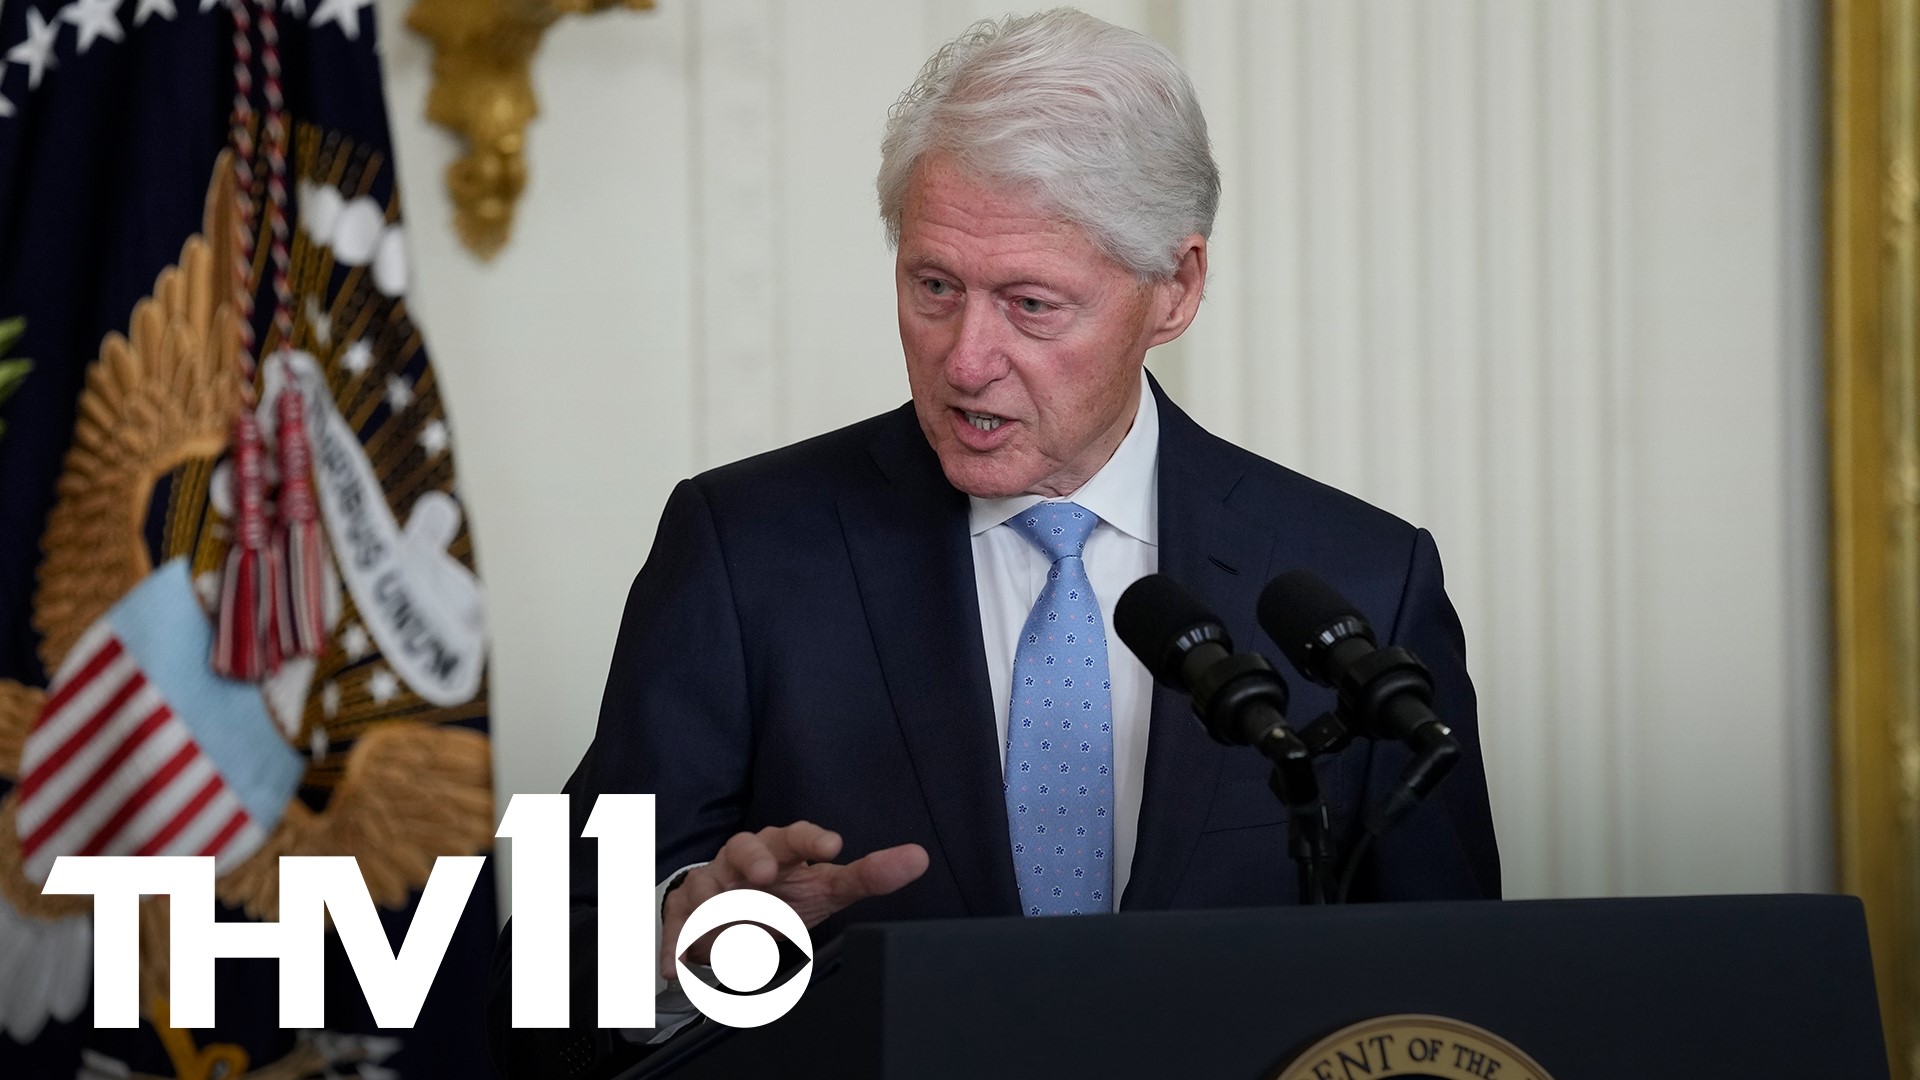 Former President Bill Clinton signed the Family and Medical Leave Act OF 1993 into law during his administration.